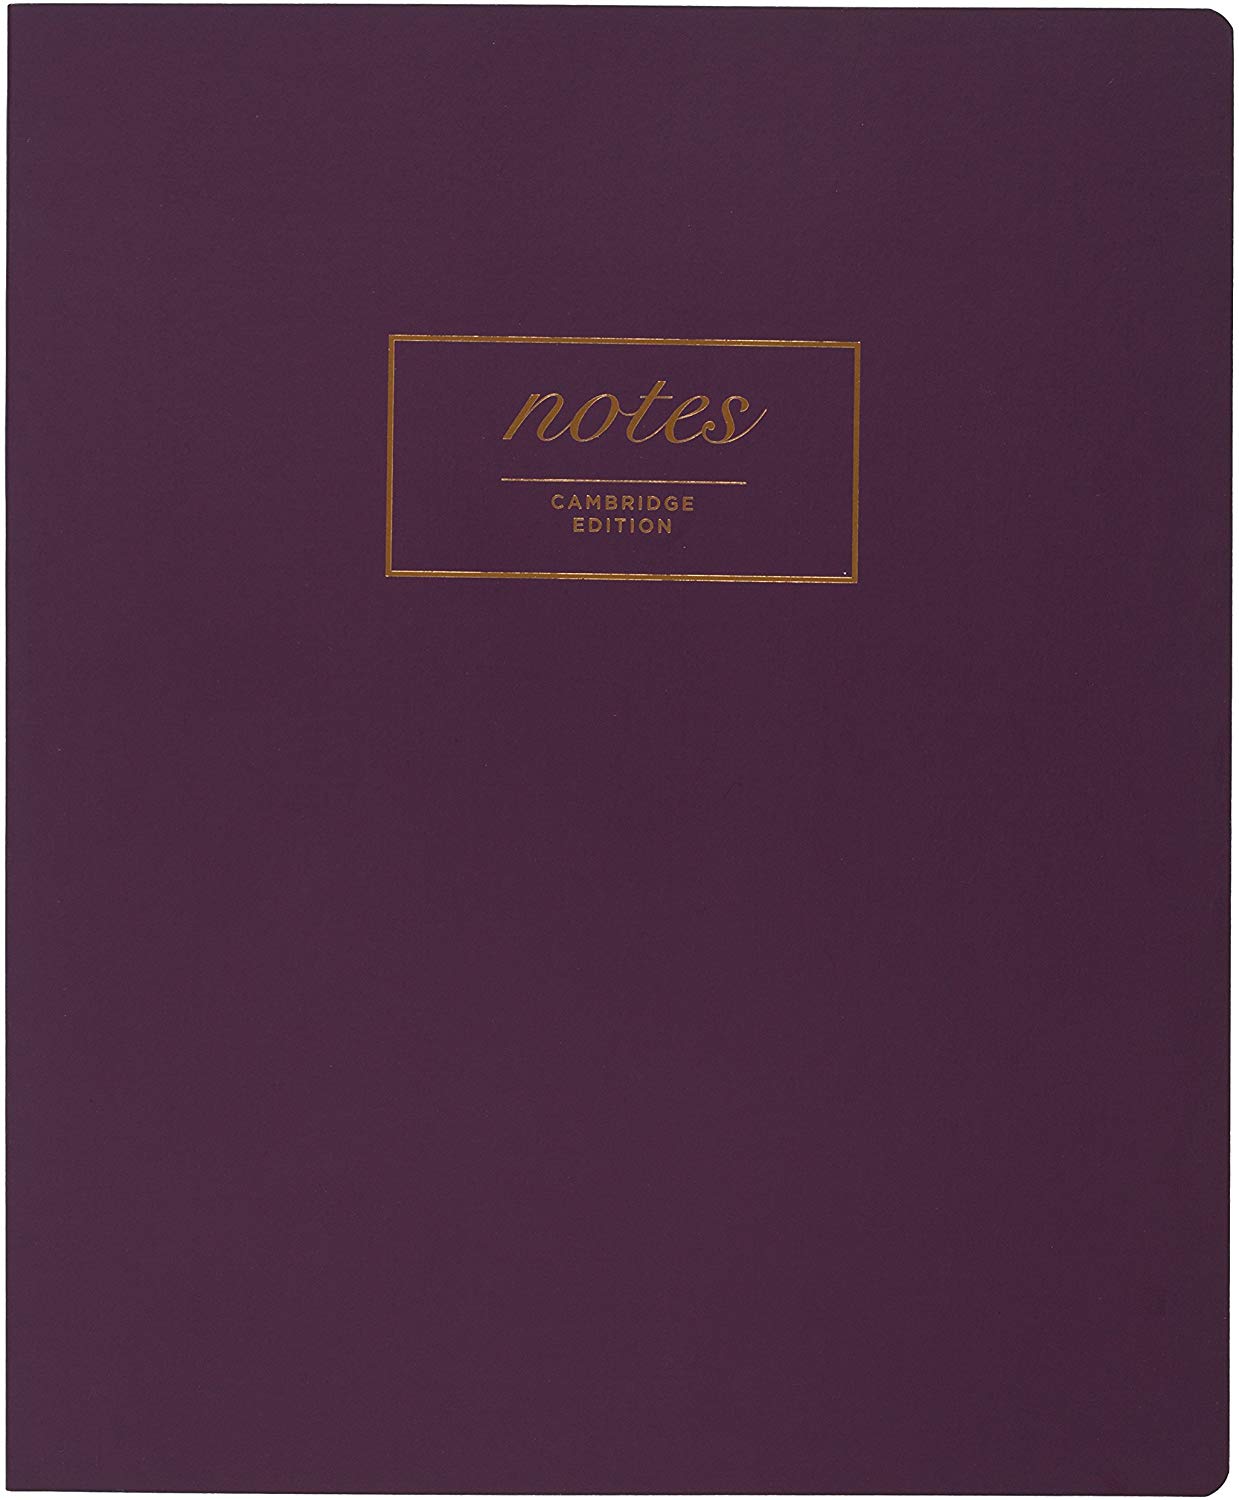 Cambridge "notes" Meeting Notebook / Journal, 11" x 9", Assorted Colors (49559)